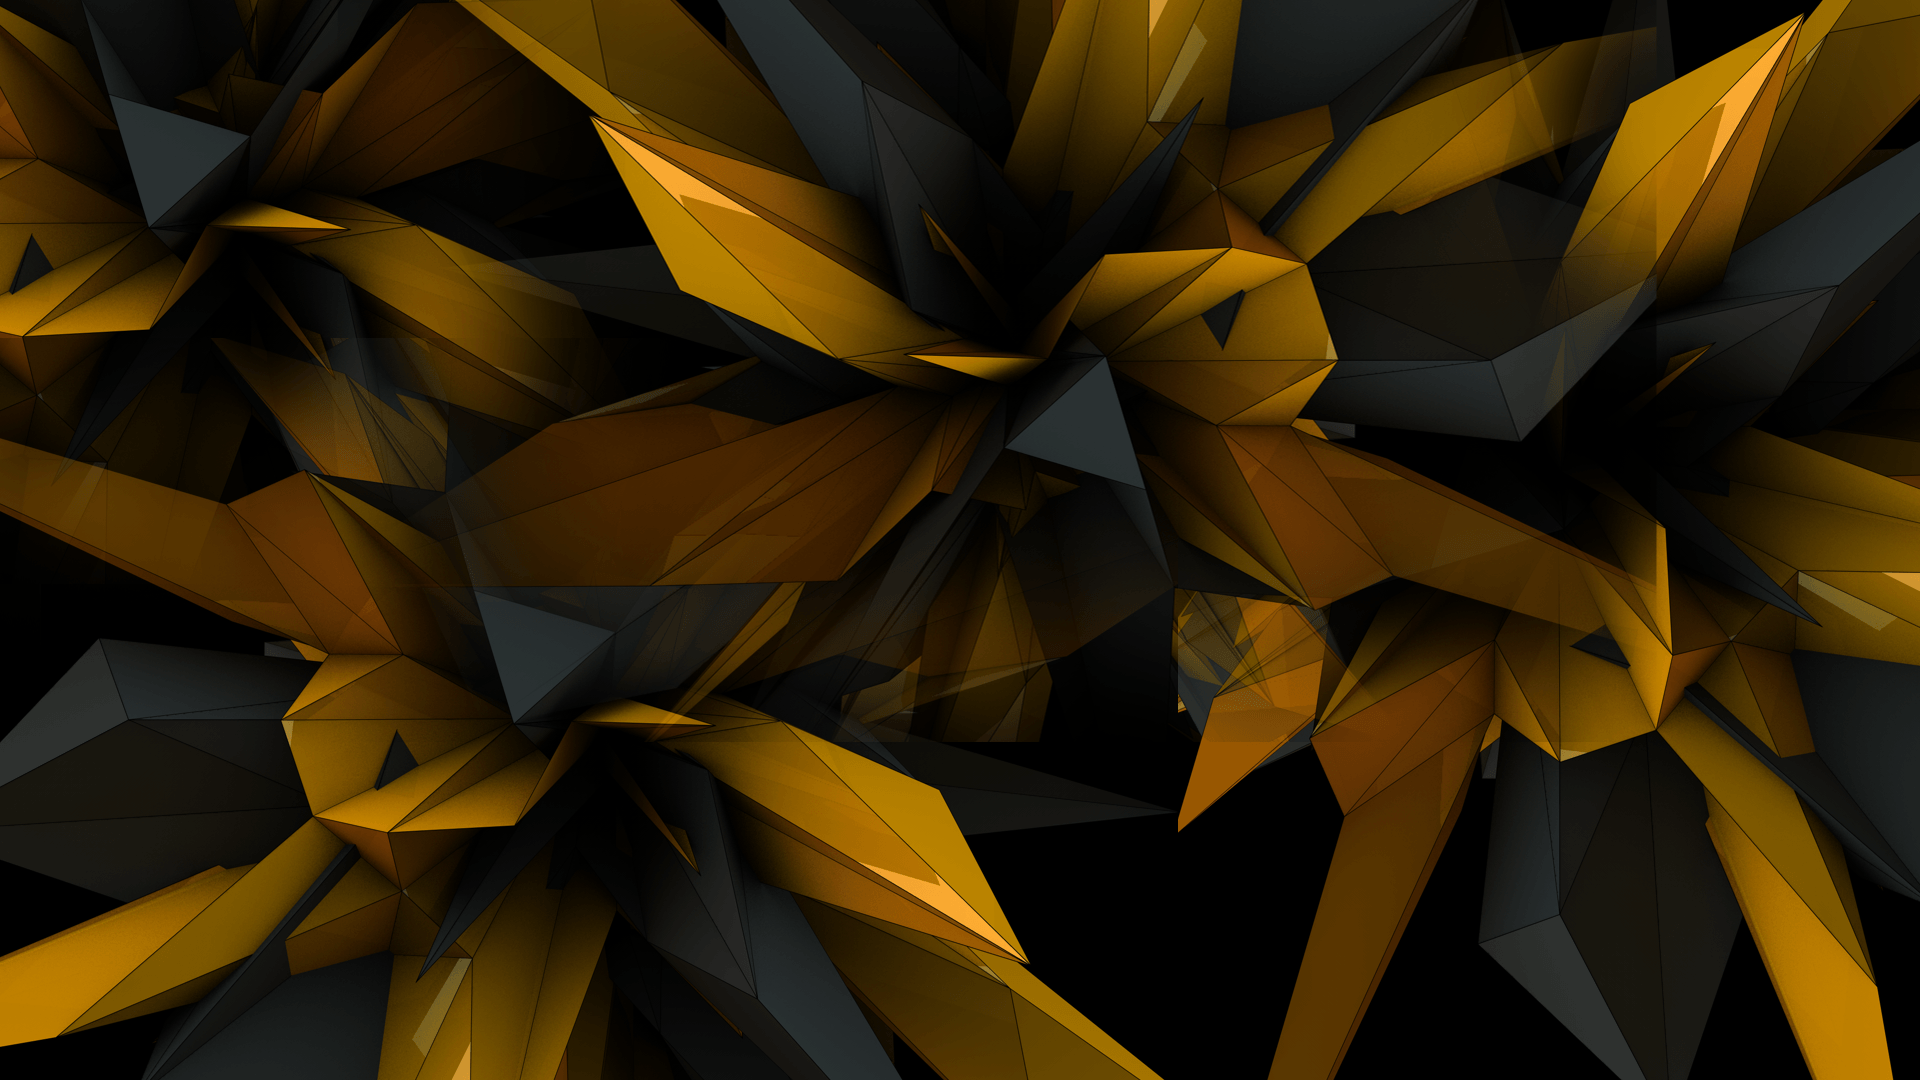 Black and Gold Abstract Wallpaper Free Black and Gold Abstract Background